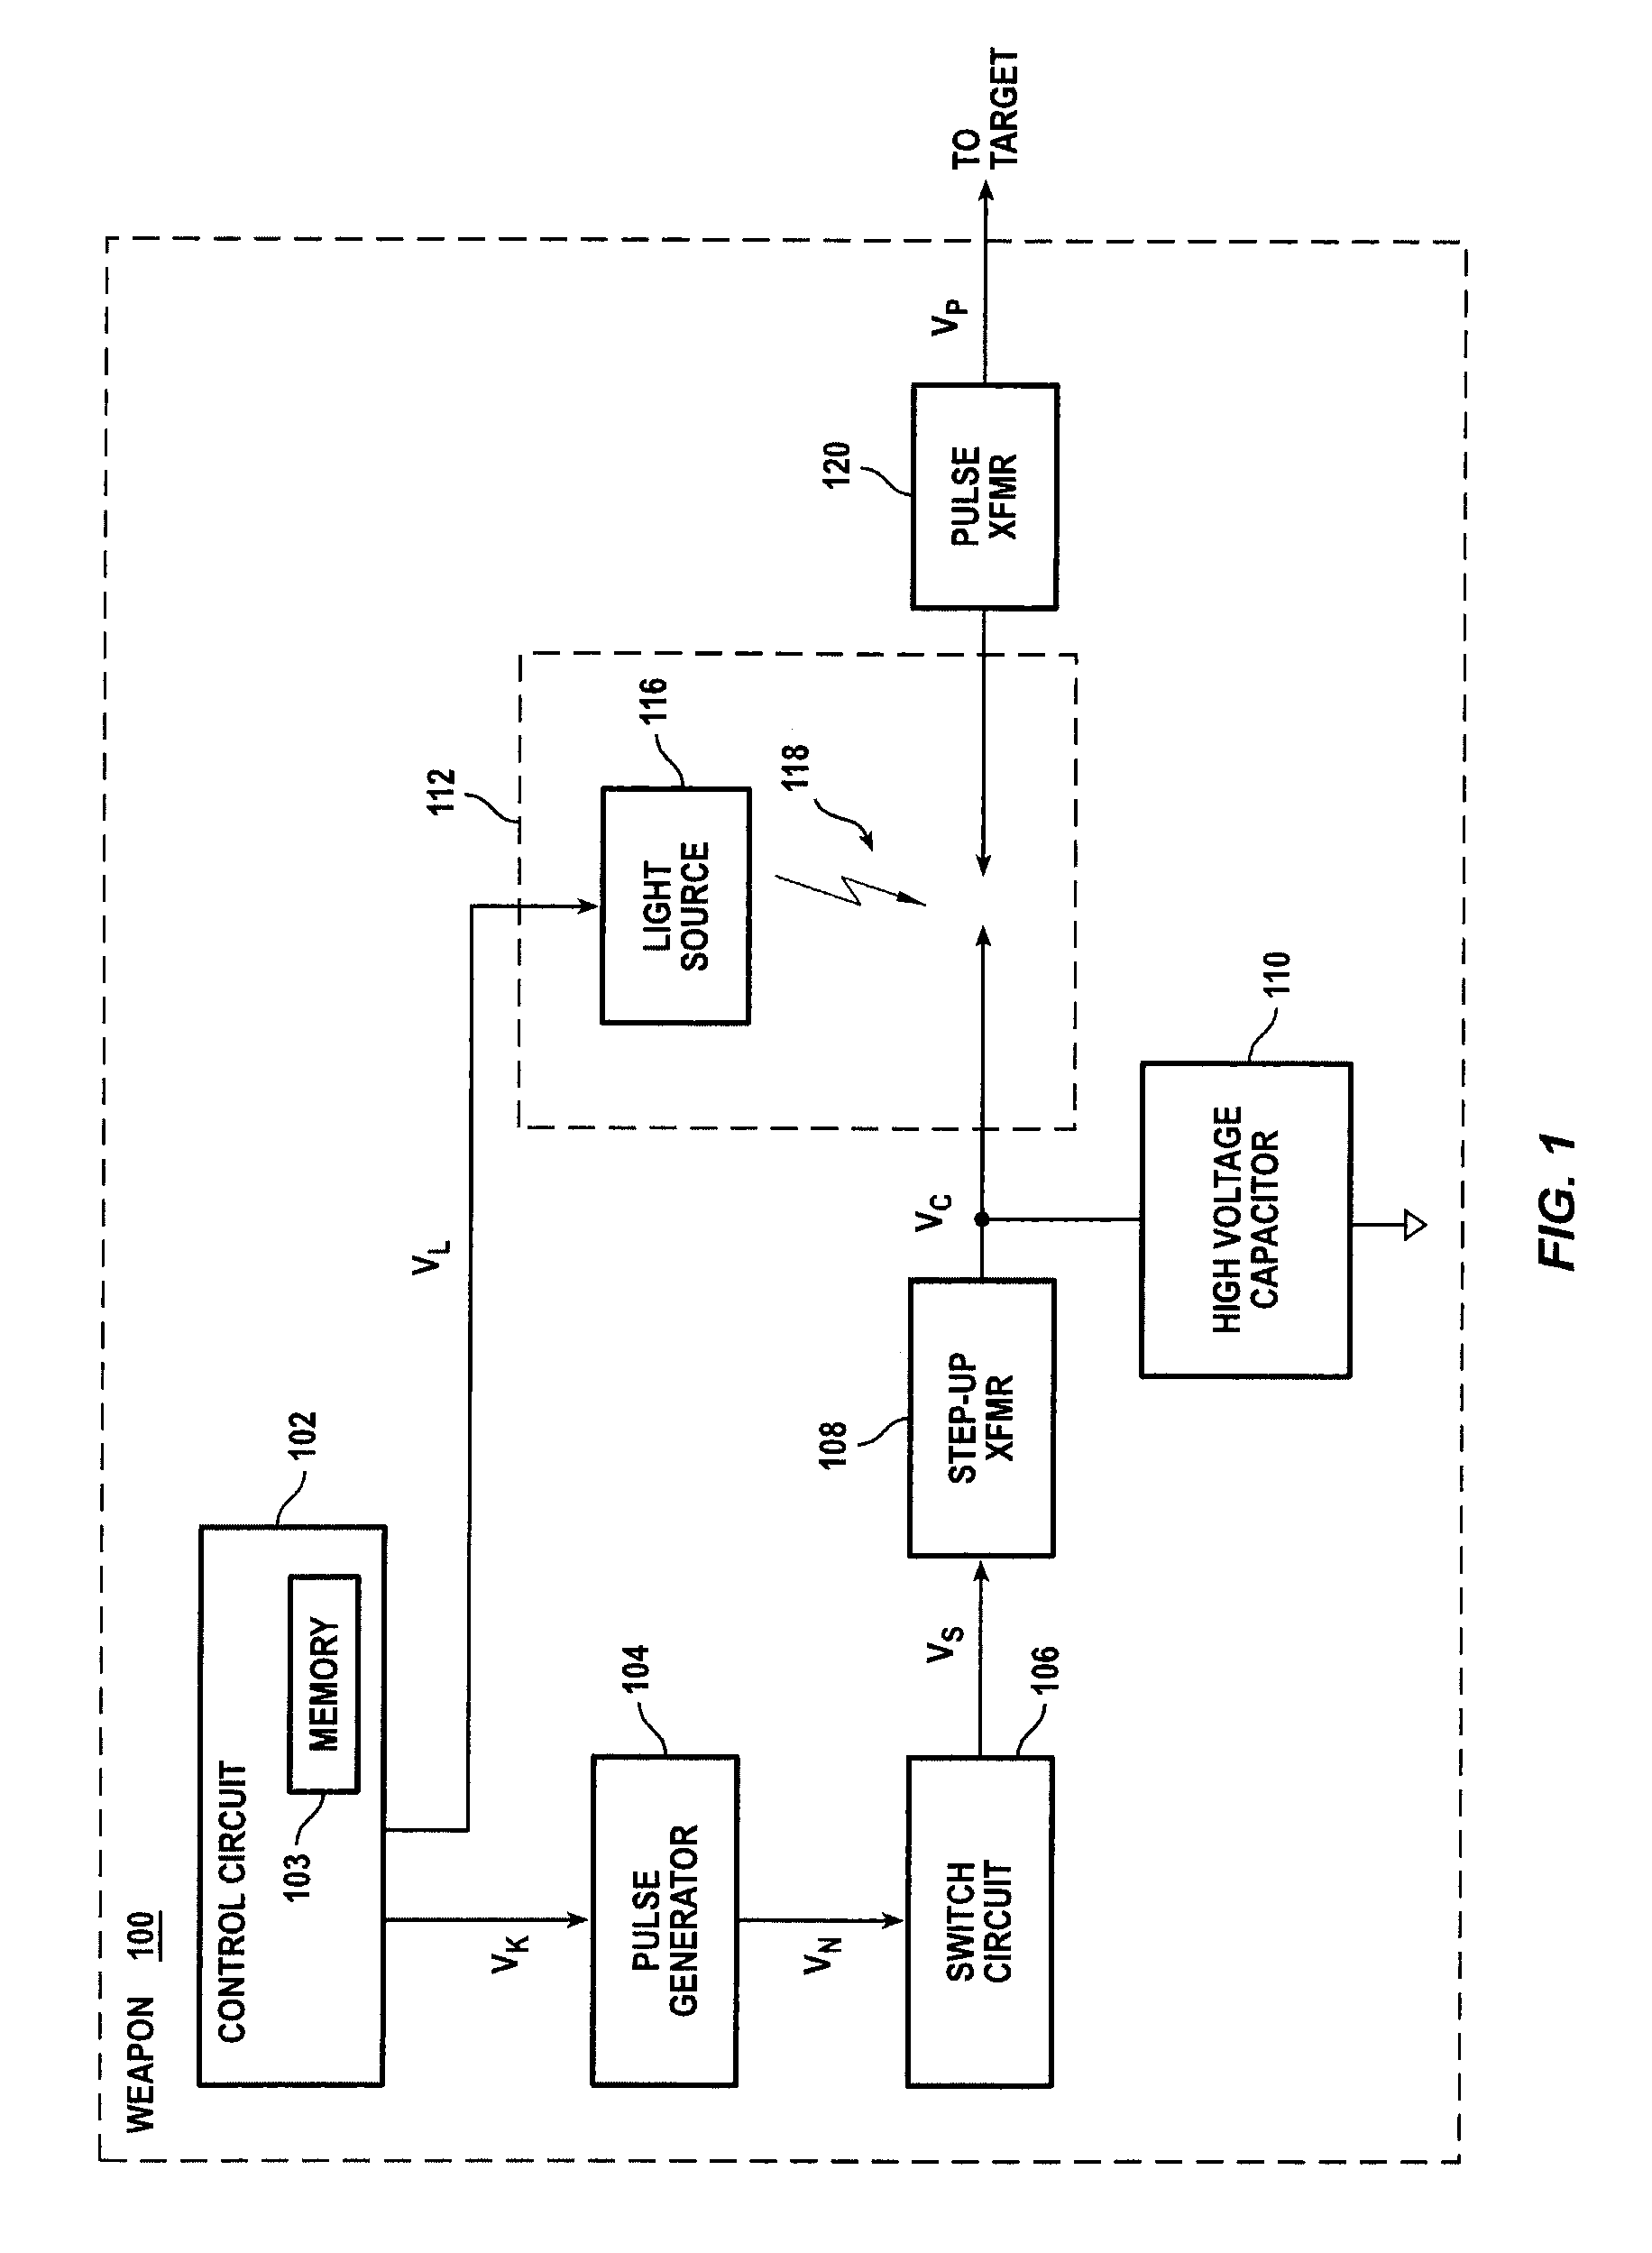 Systems and methods for illuminating a spark gap in an electric discharge weapon